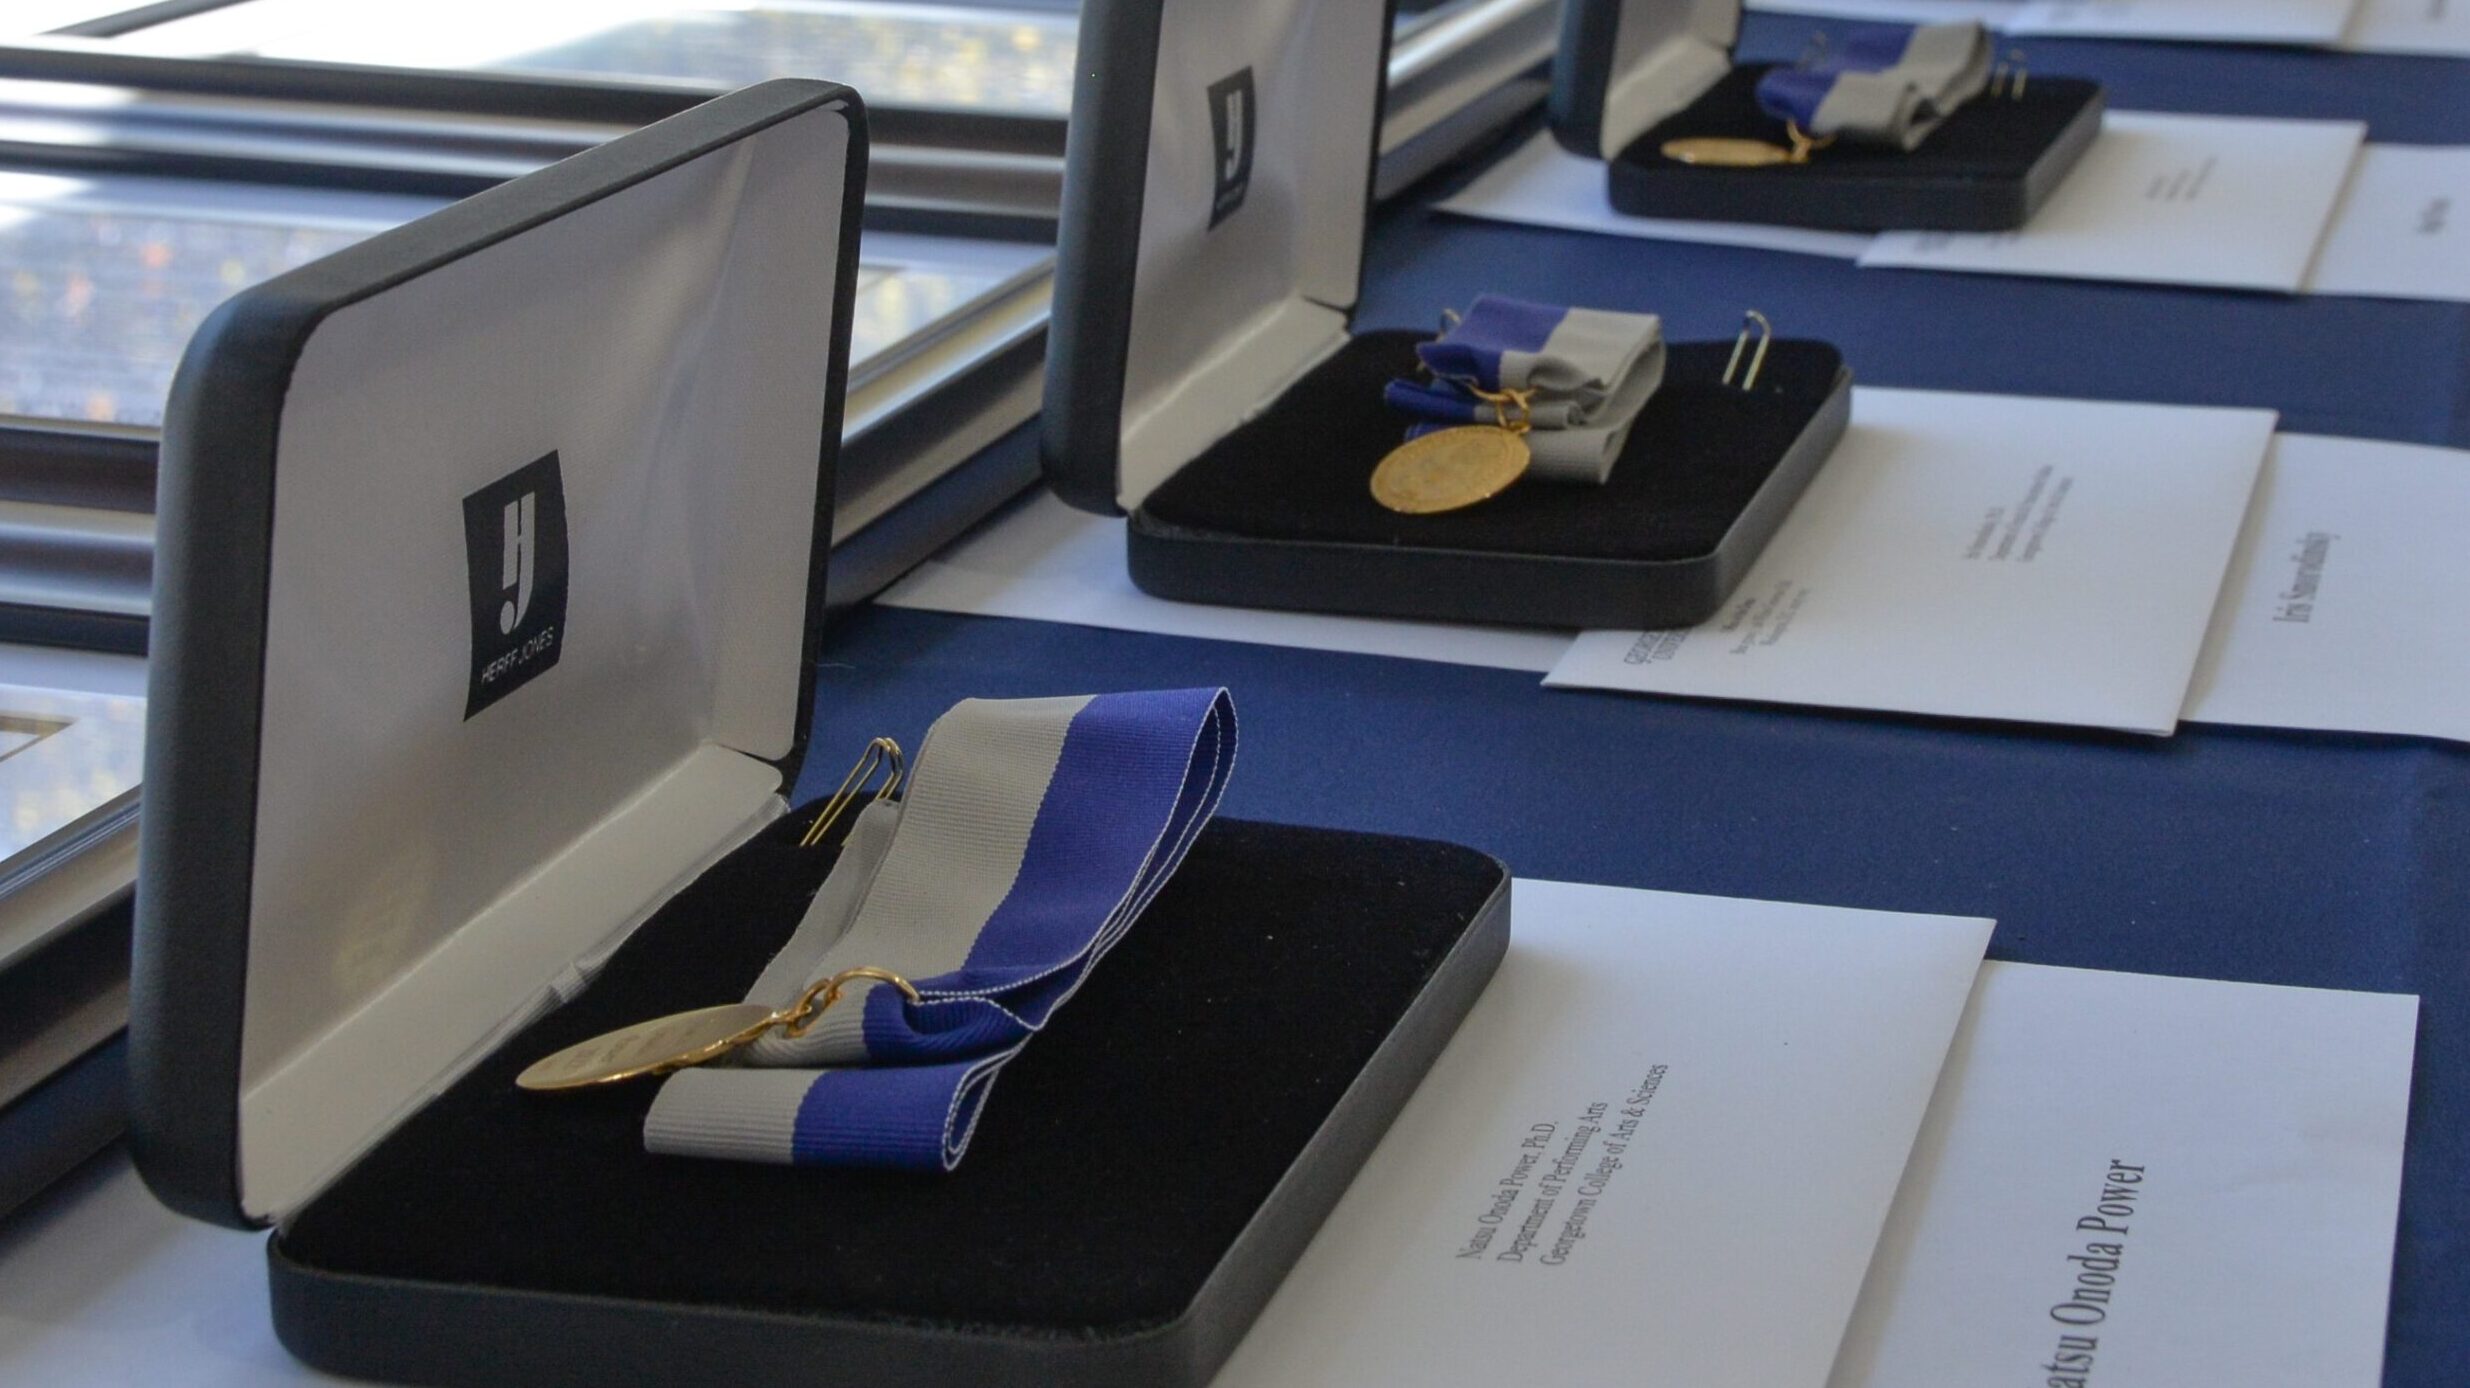 Three medals strung on blue and gray ribbons set in their cases on a table.